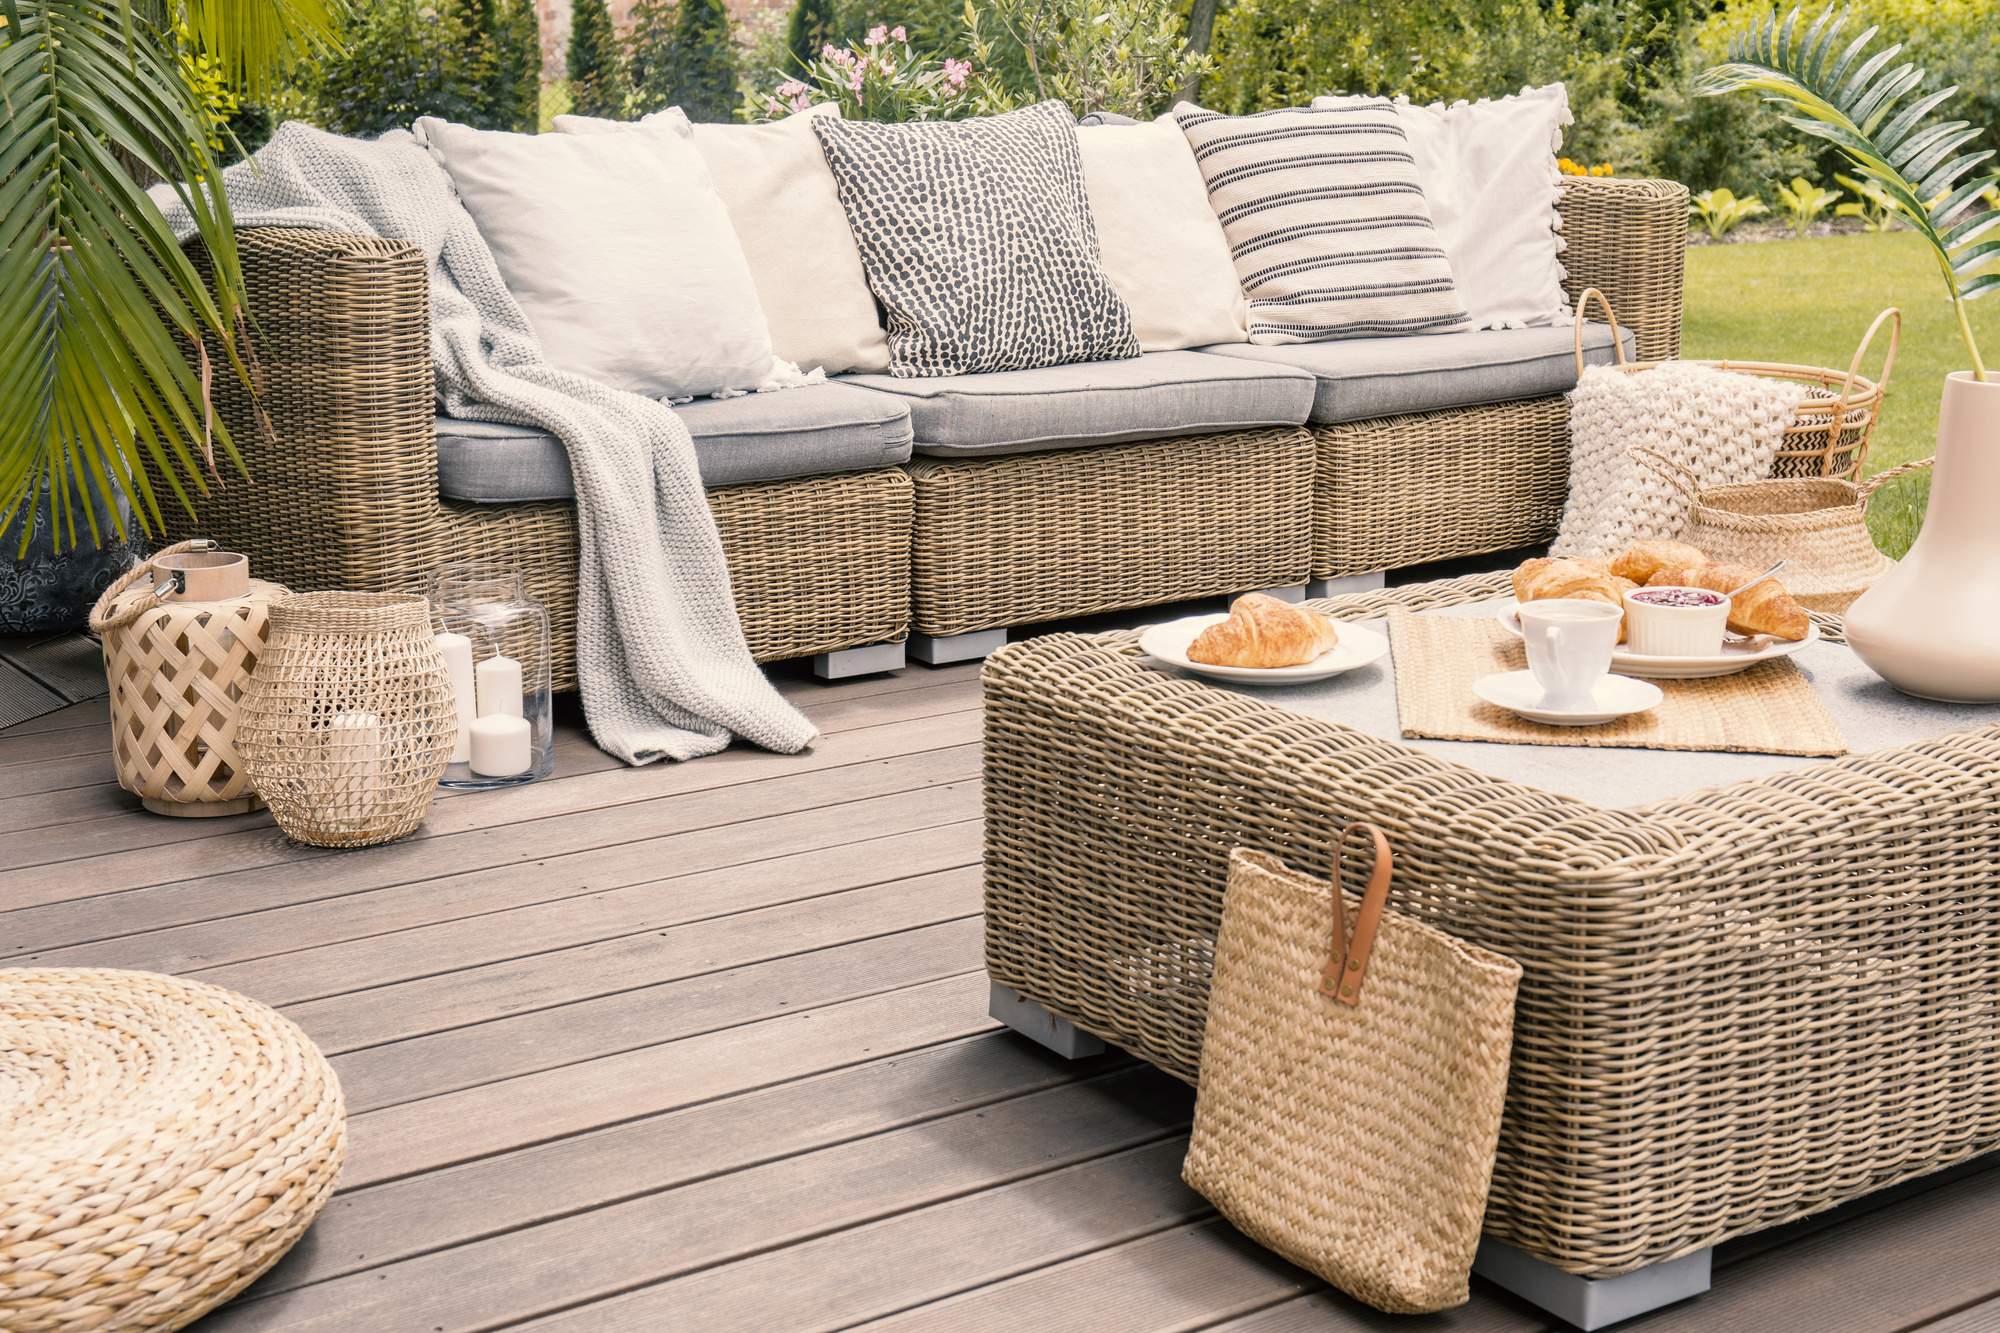 Styling Rules for an Inviting Outdoor Living Space